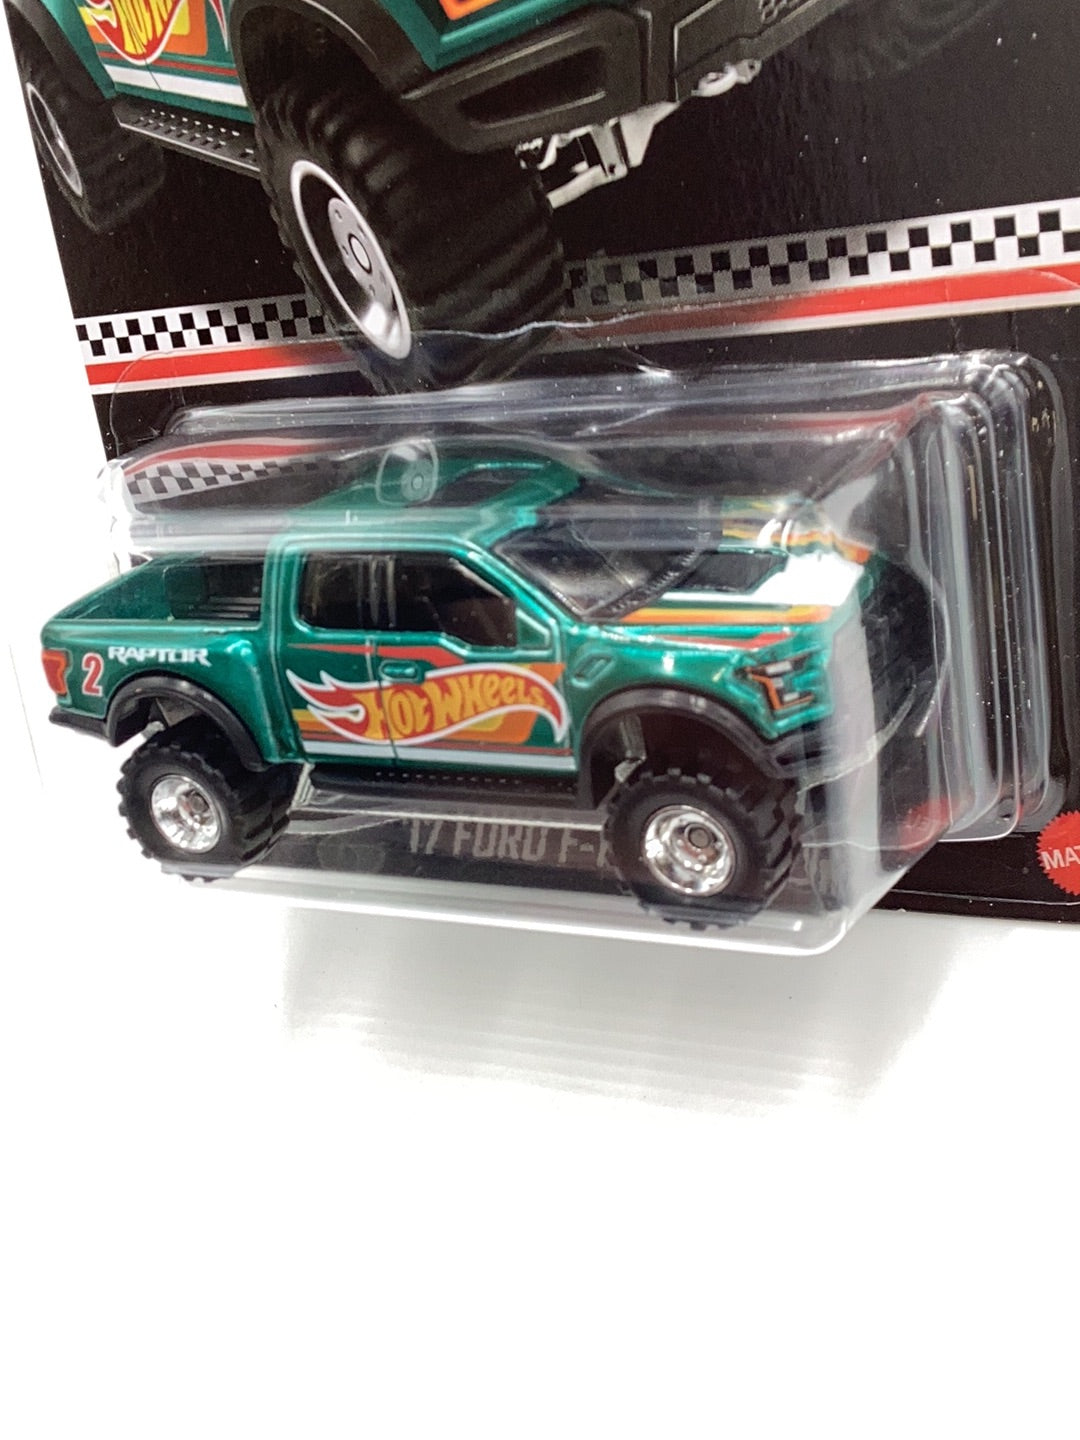 2021 collectors edition Hot wheels RLC Mail in  17 Ford F150 Raptor with protector